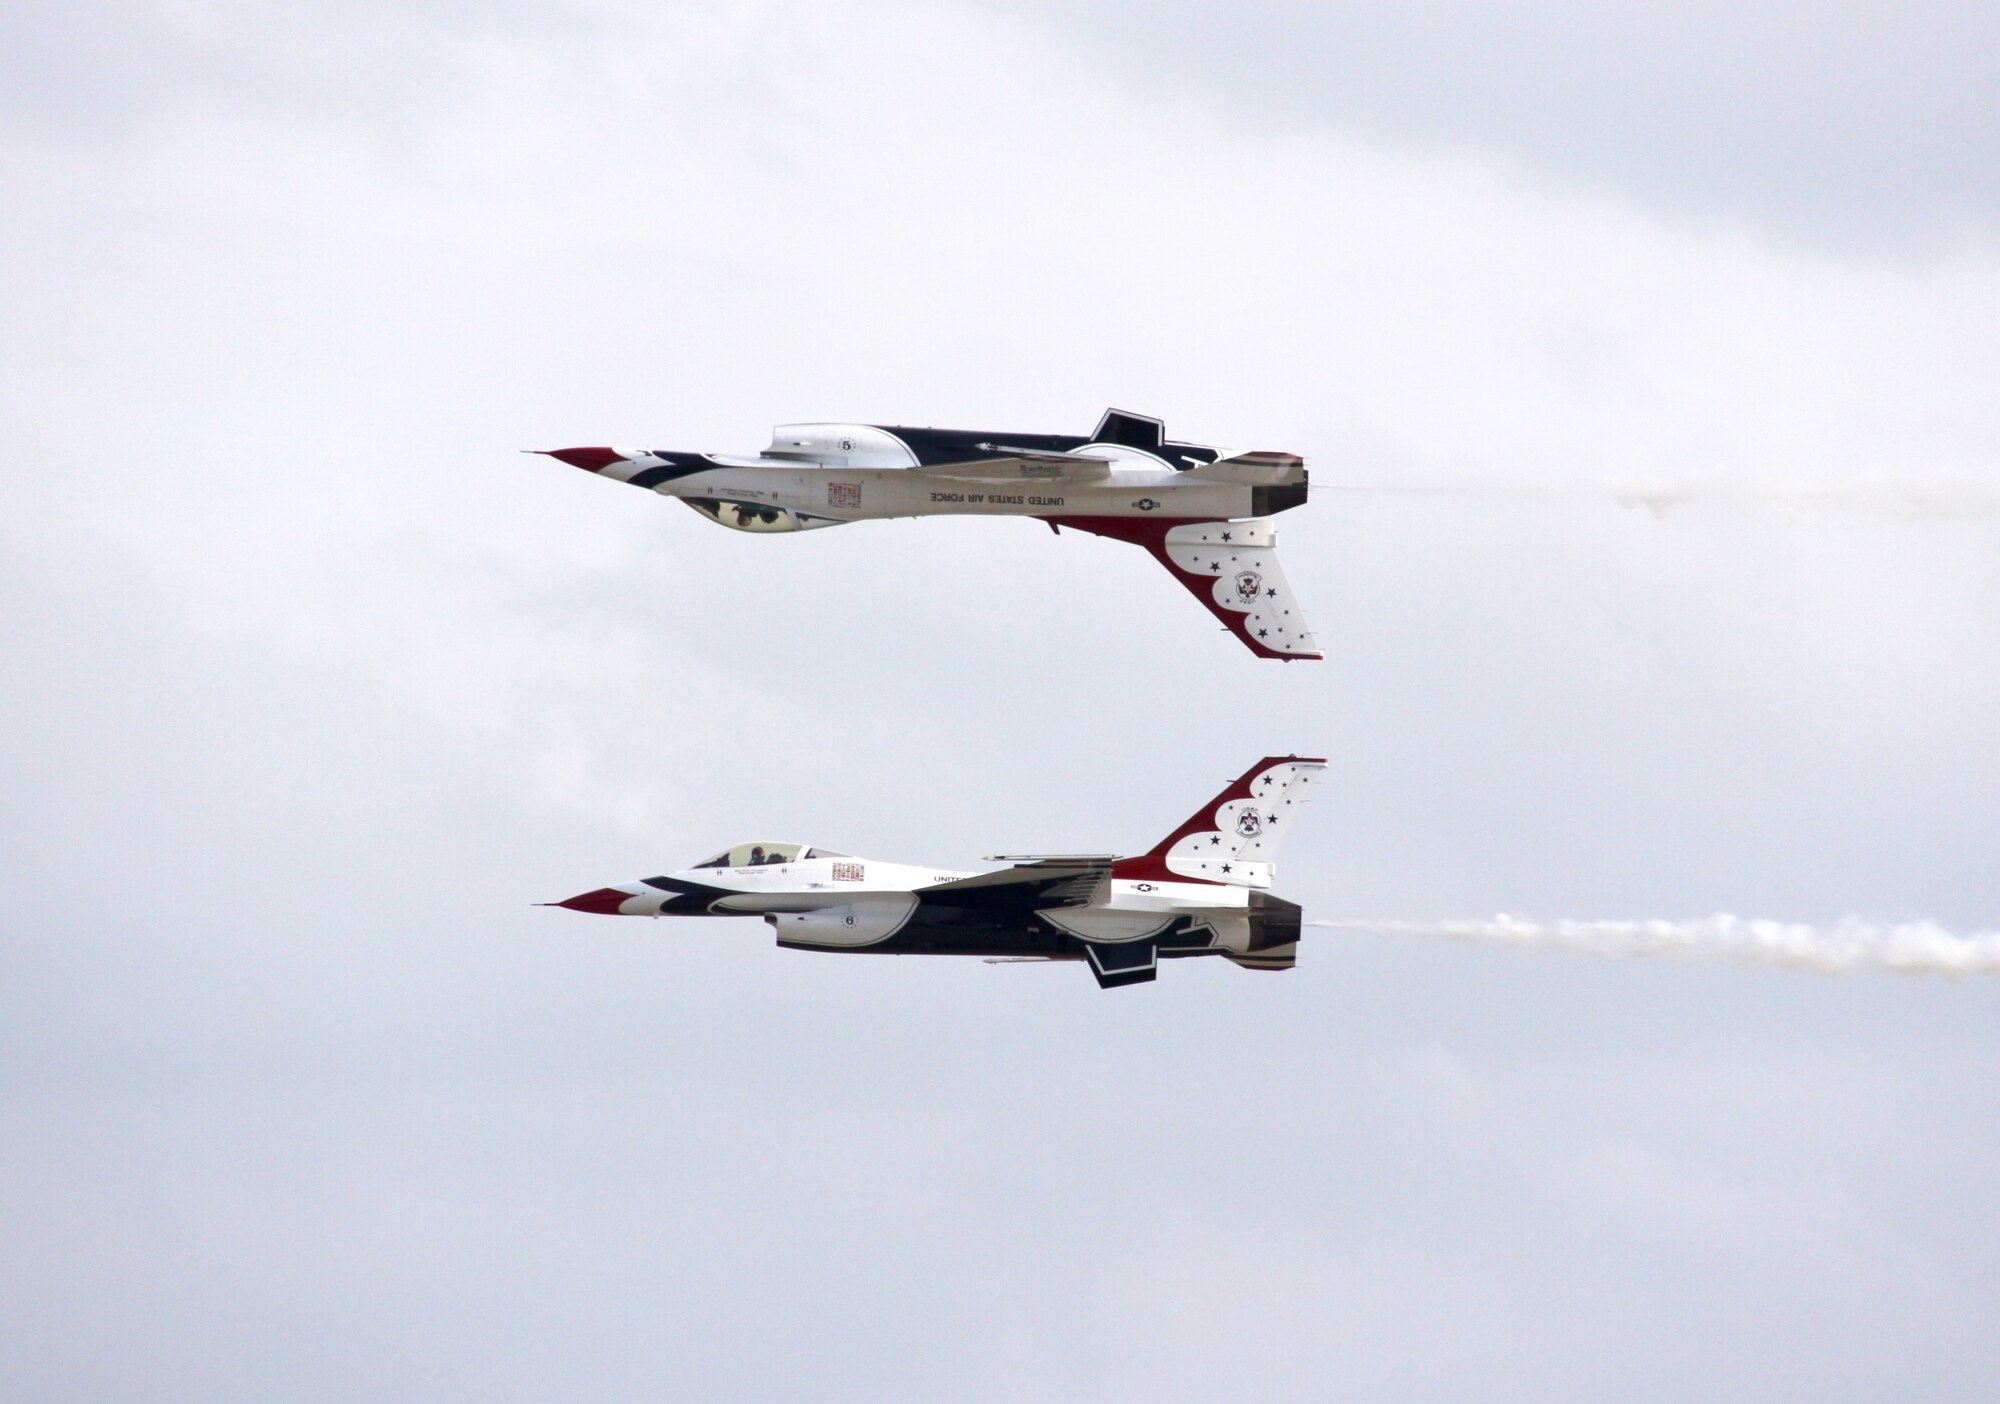 After an 18-year hiatus, the 2009 Wings Over Homestead Air Show roared back with a deep list of performers and displays. The U.S. Air Force Thunderbirds were the headline performance. (U.S. Air Force photo/Tech. Sgt. Lionel Castellano)